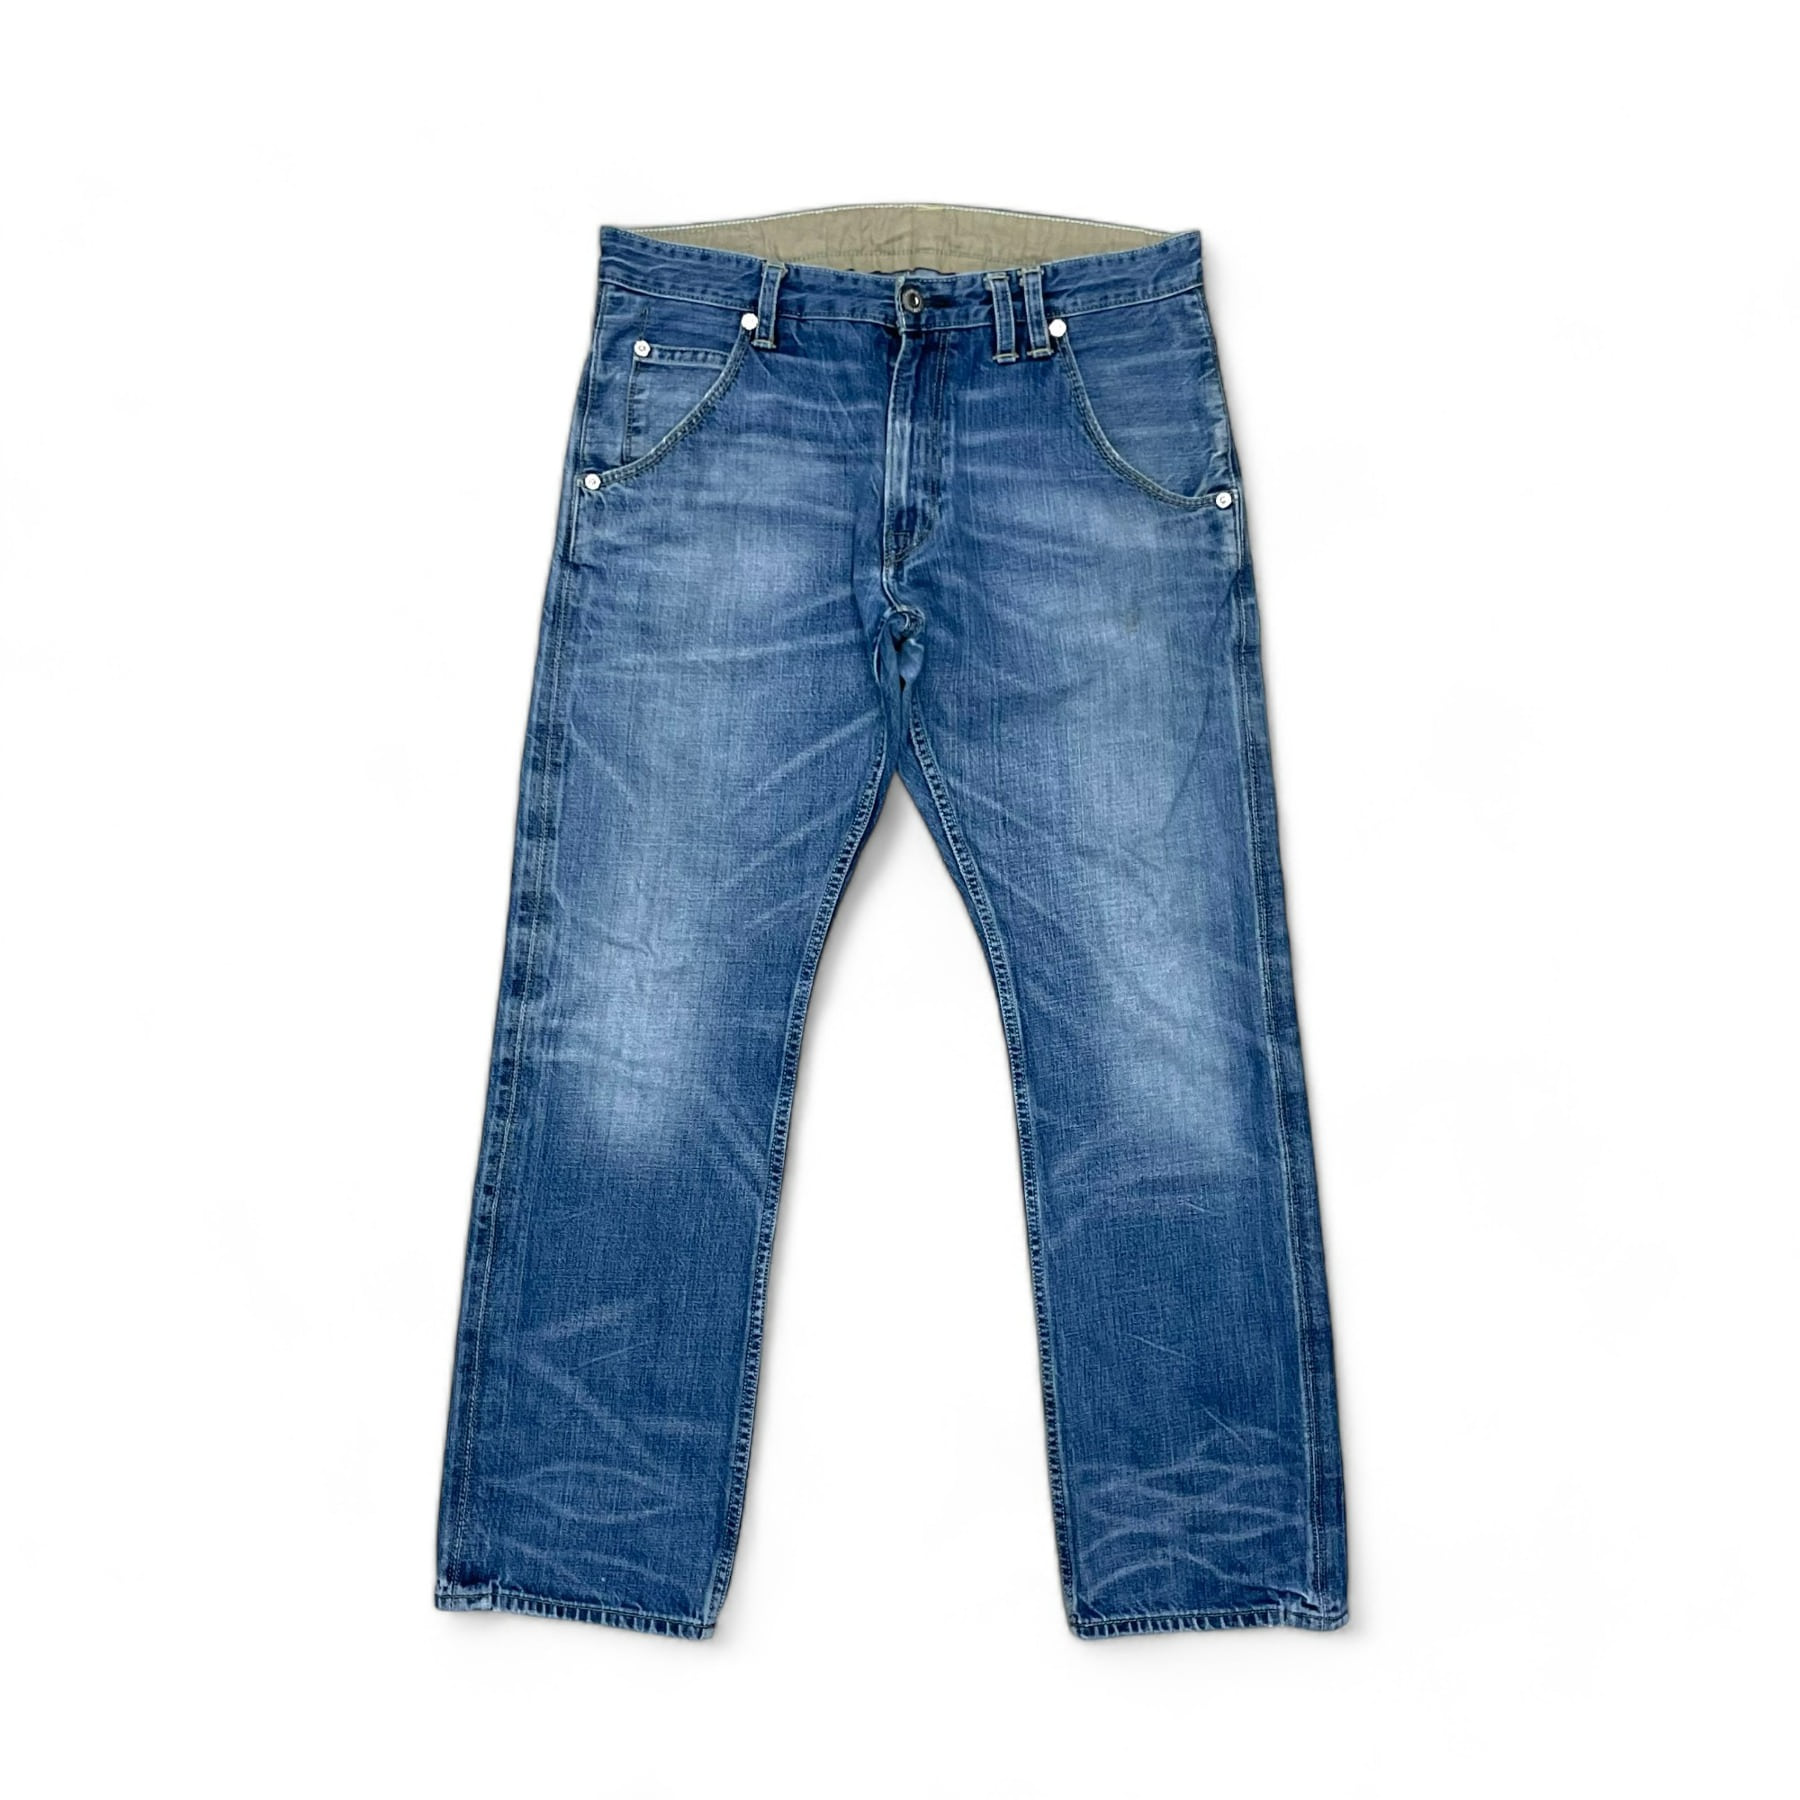 Levis 514 - 34inch